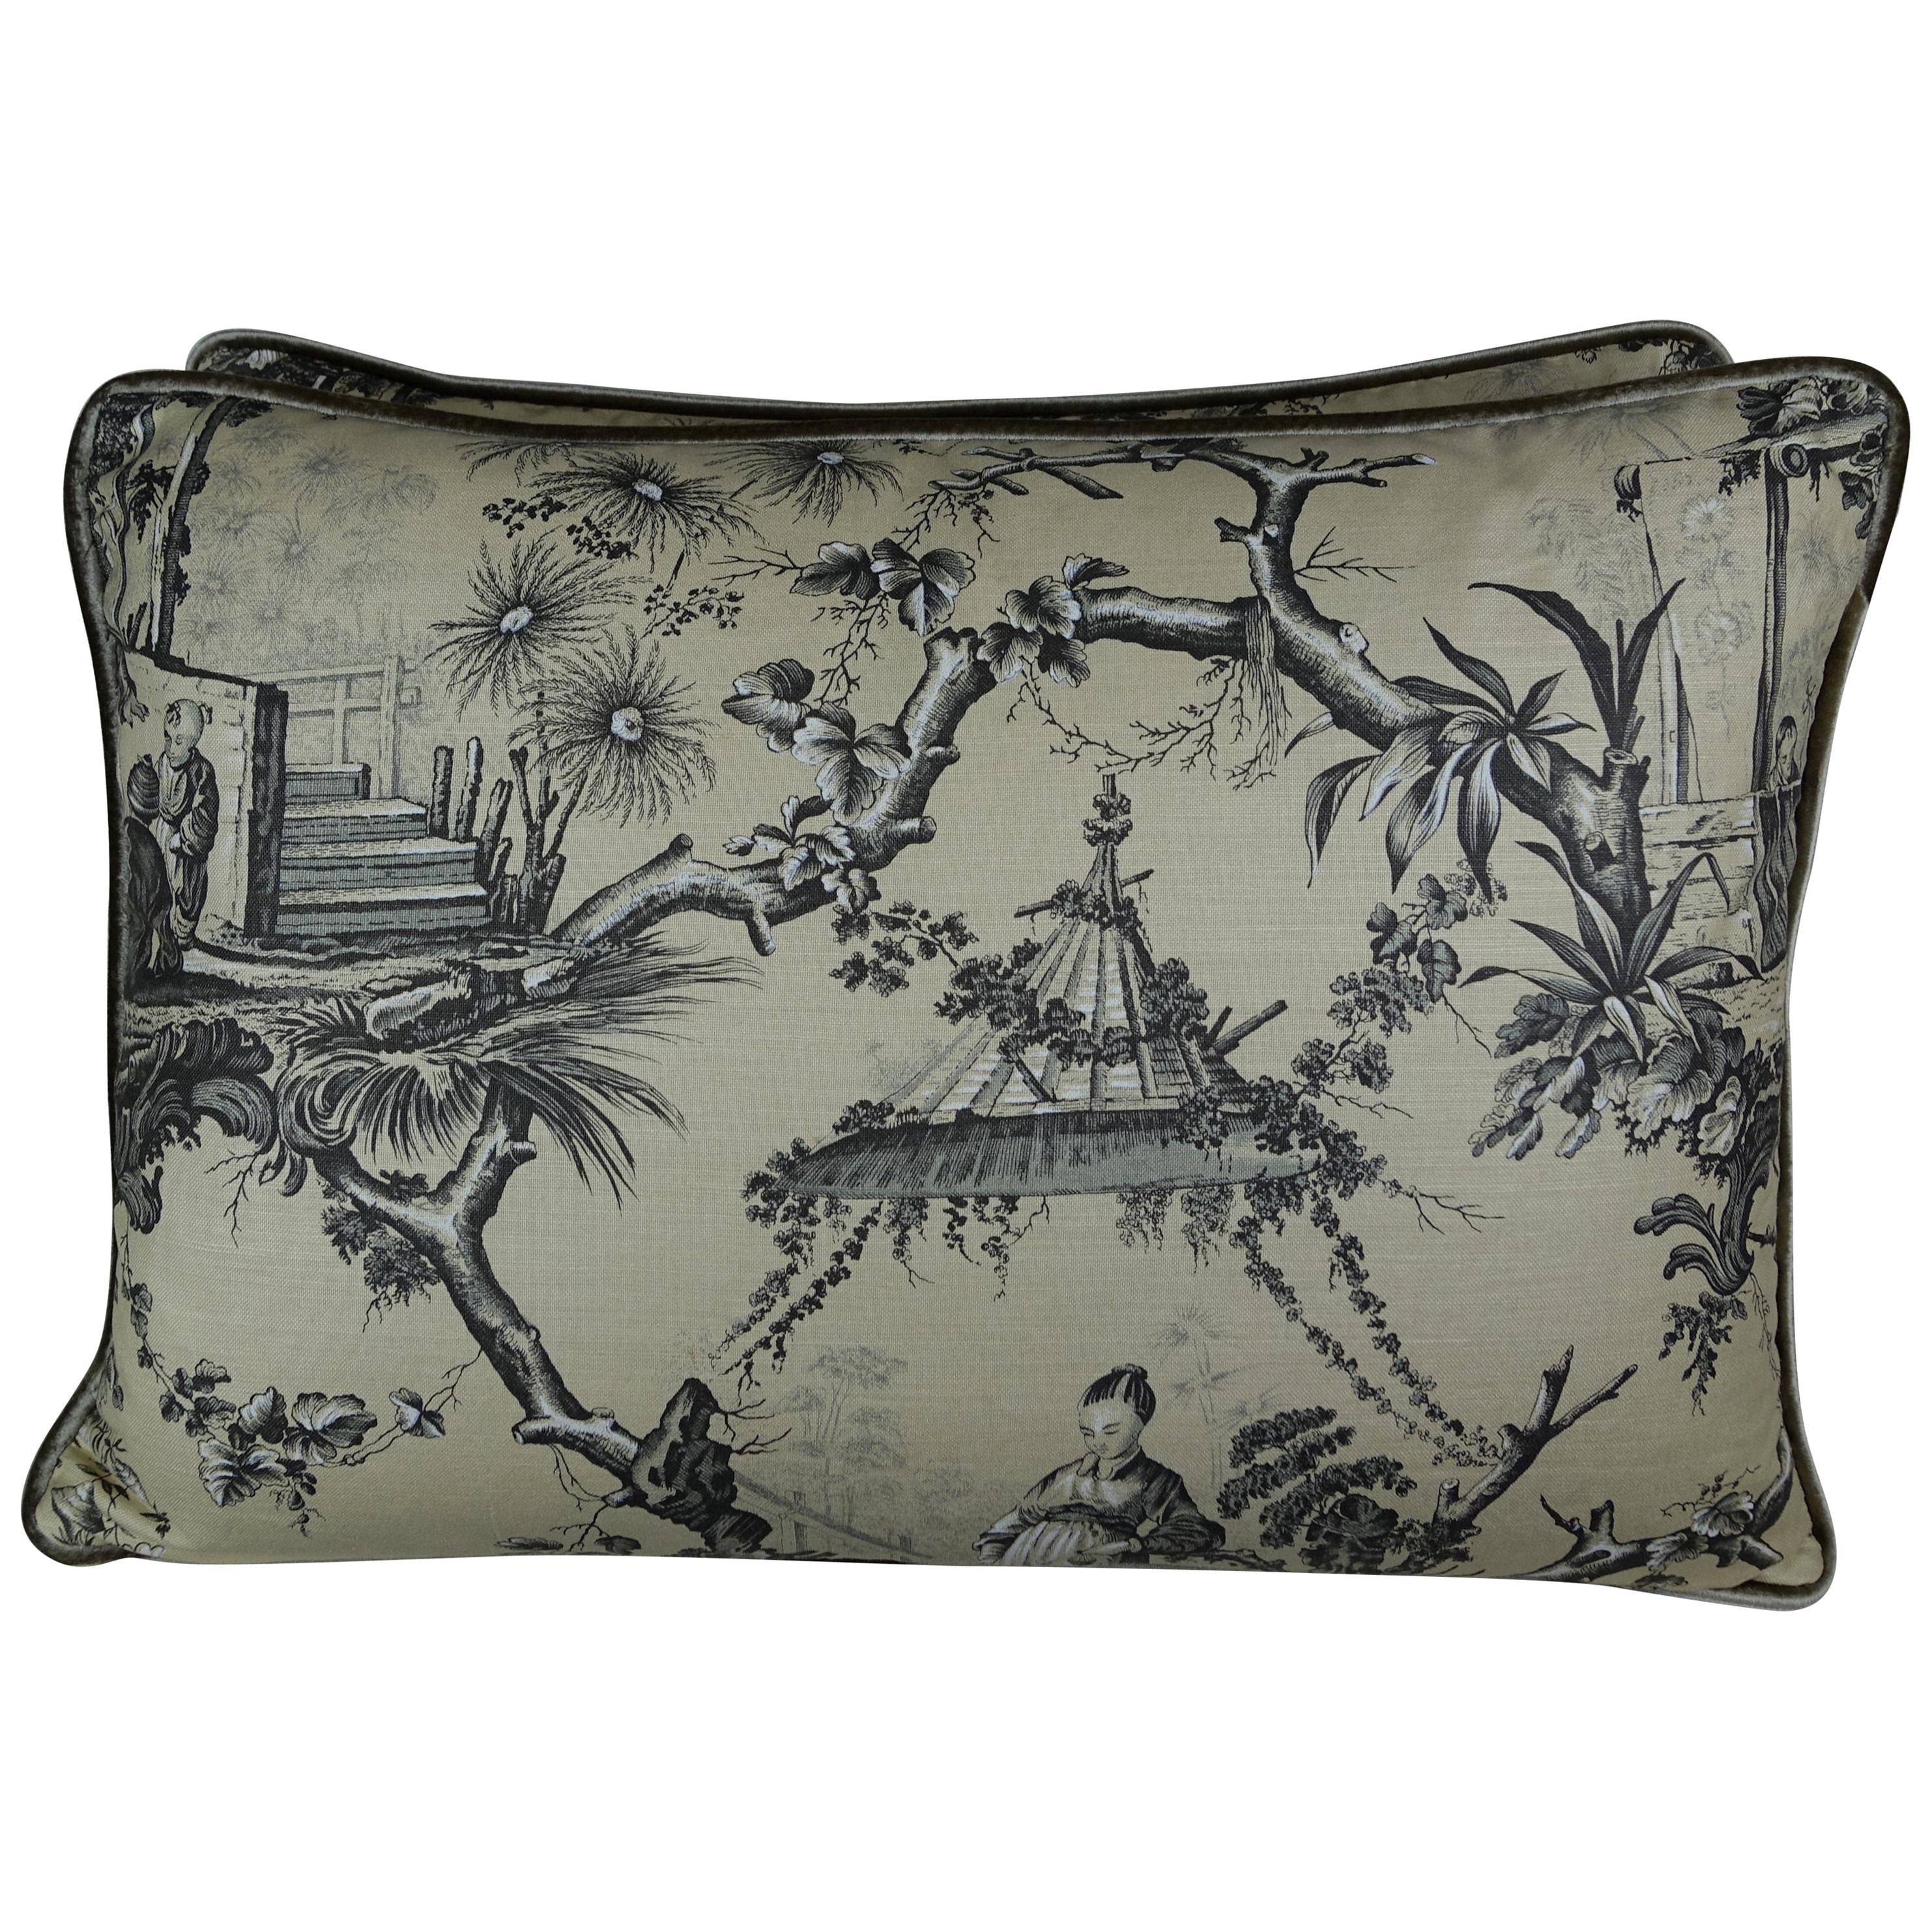 Brunschwig & Fils Chinoiserie Textile Pillows, Pair For Sale